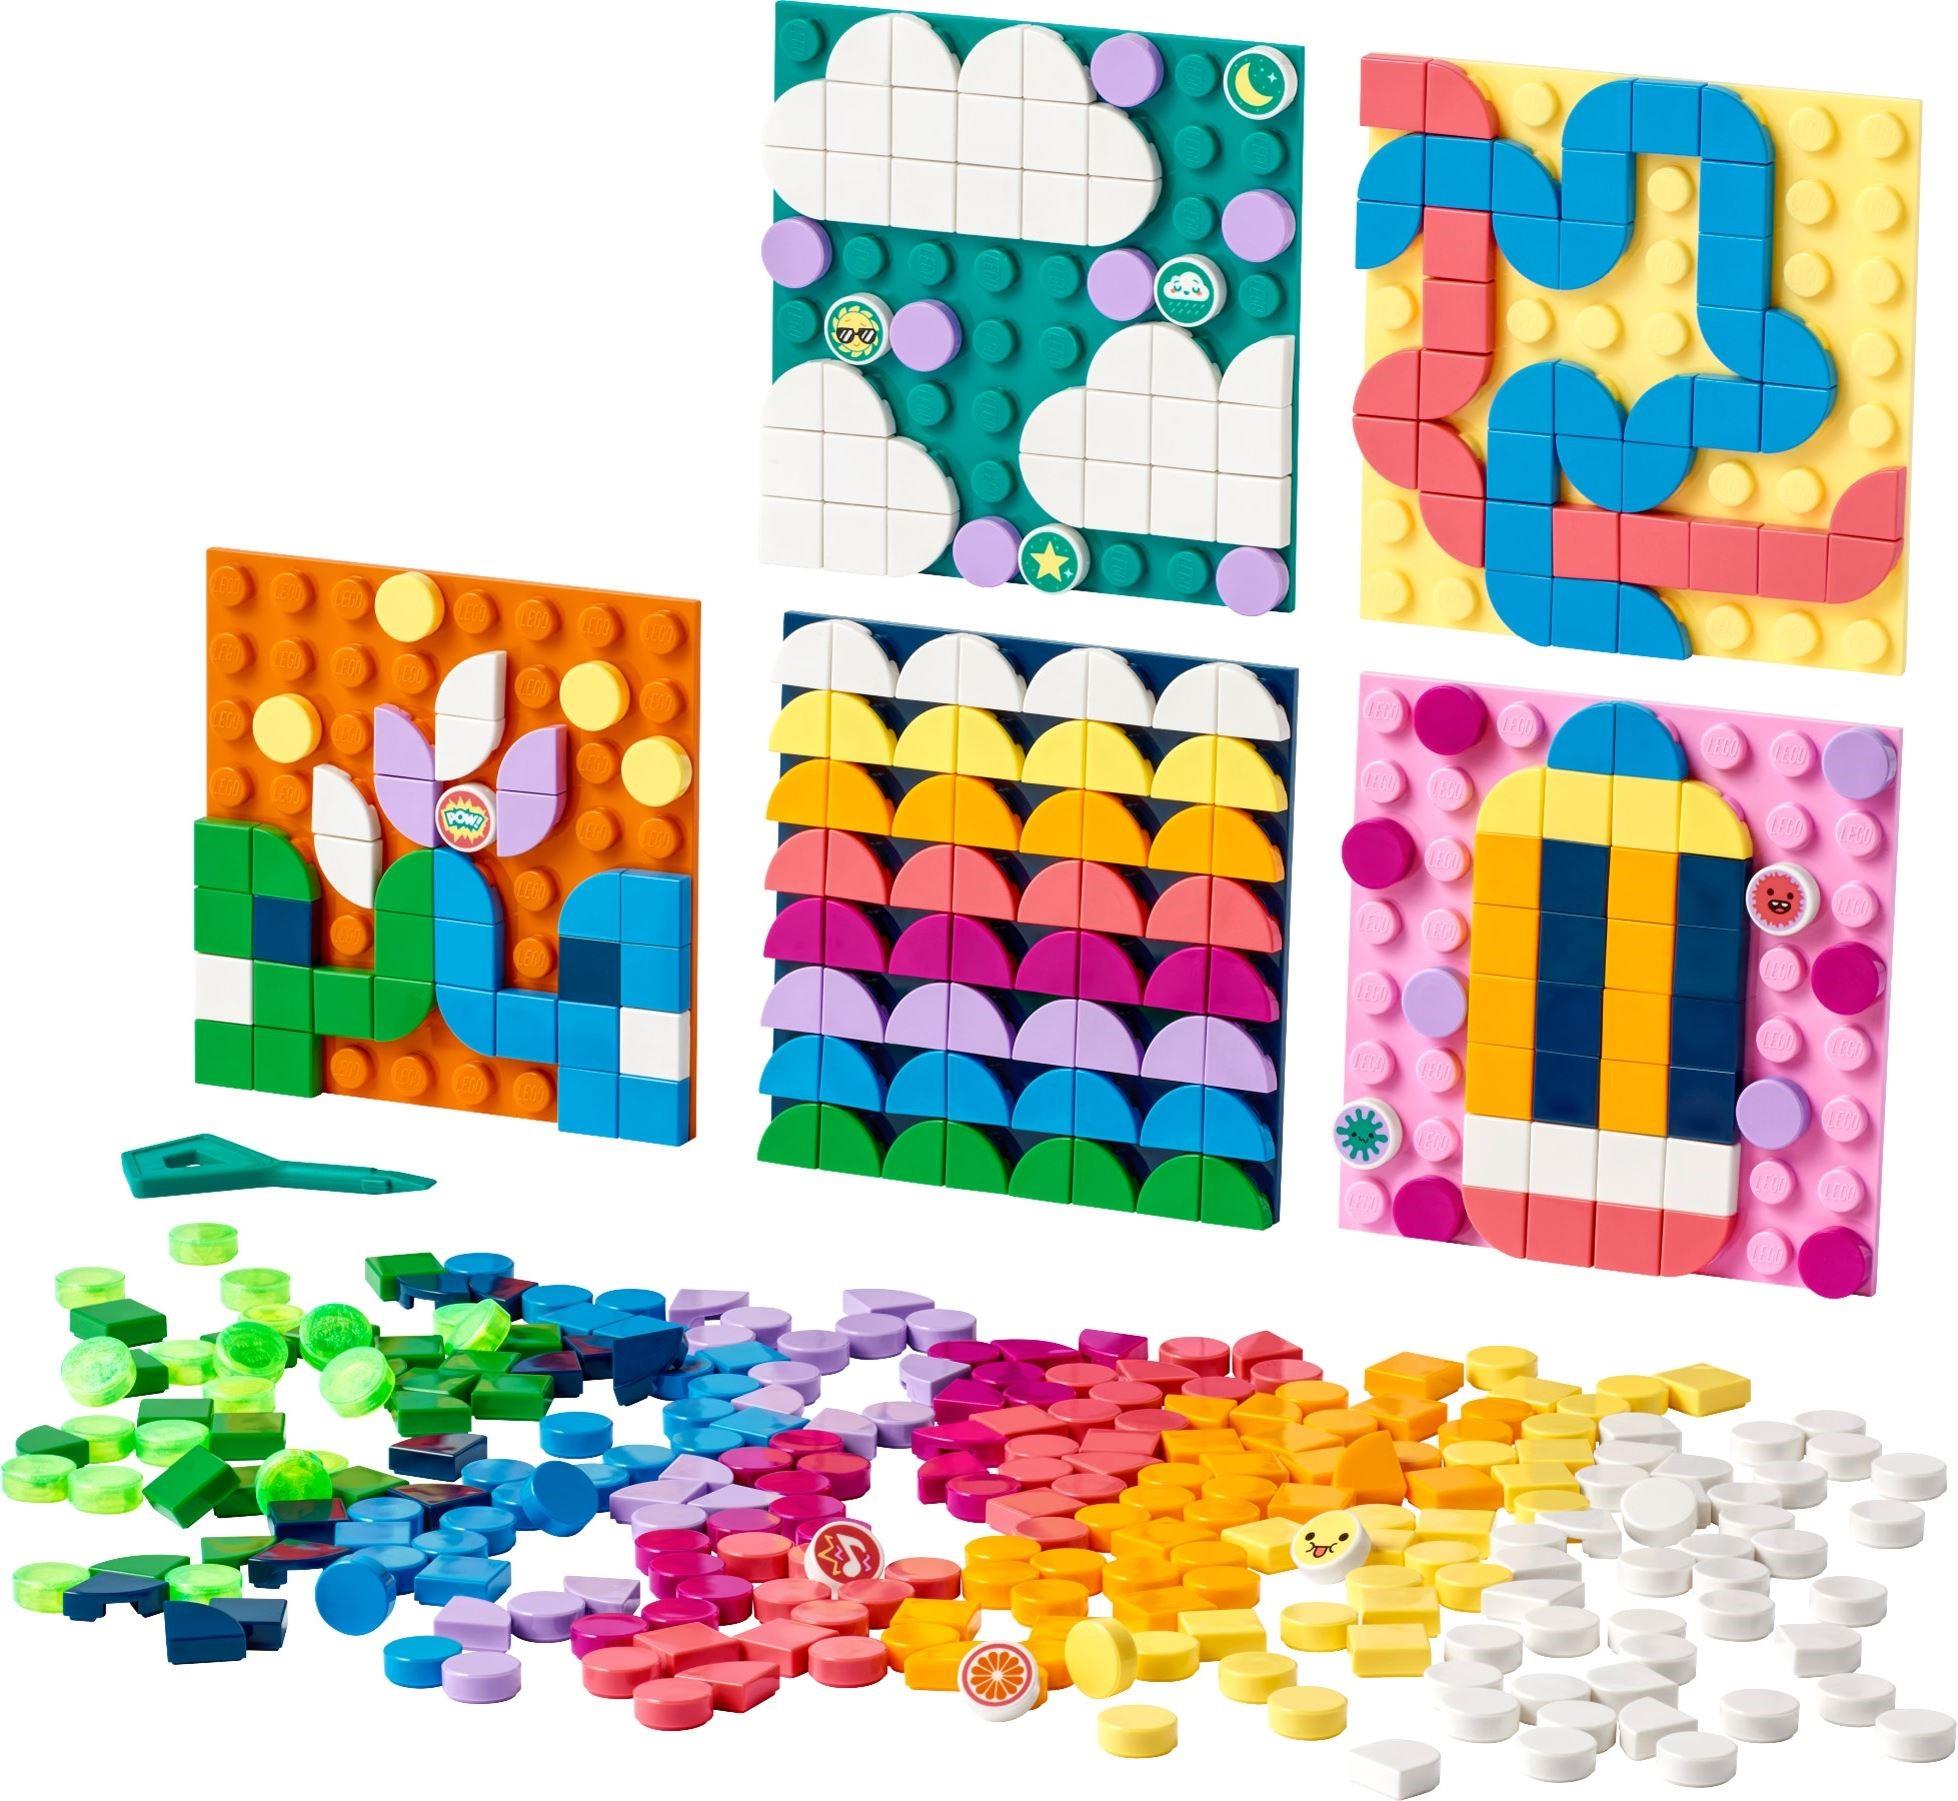 LEGO DOTS Designer Toolkit - Patterns 41961, 10 in 1 Toy Craft Set for Kids  with Patches, Photo Frame, Pencil Holder, Storage Tray, Creative Activity 